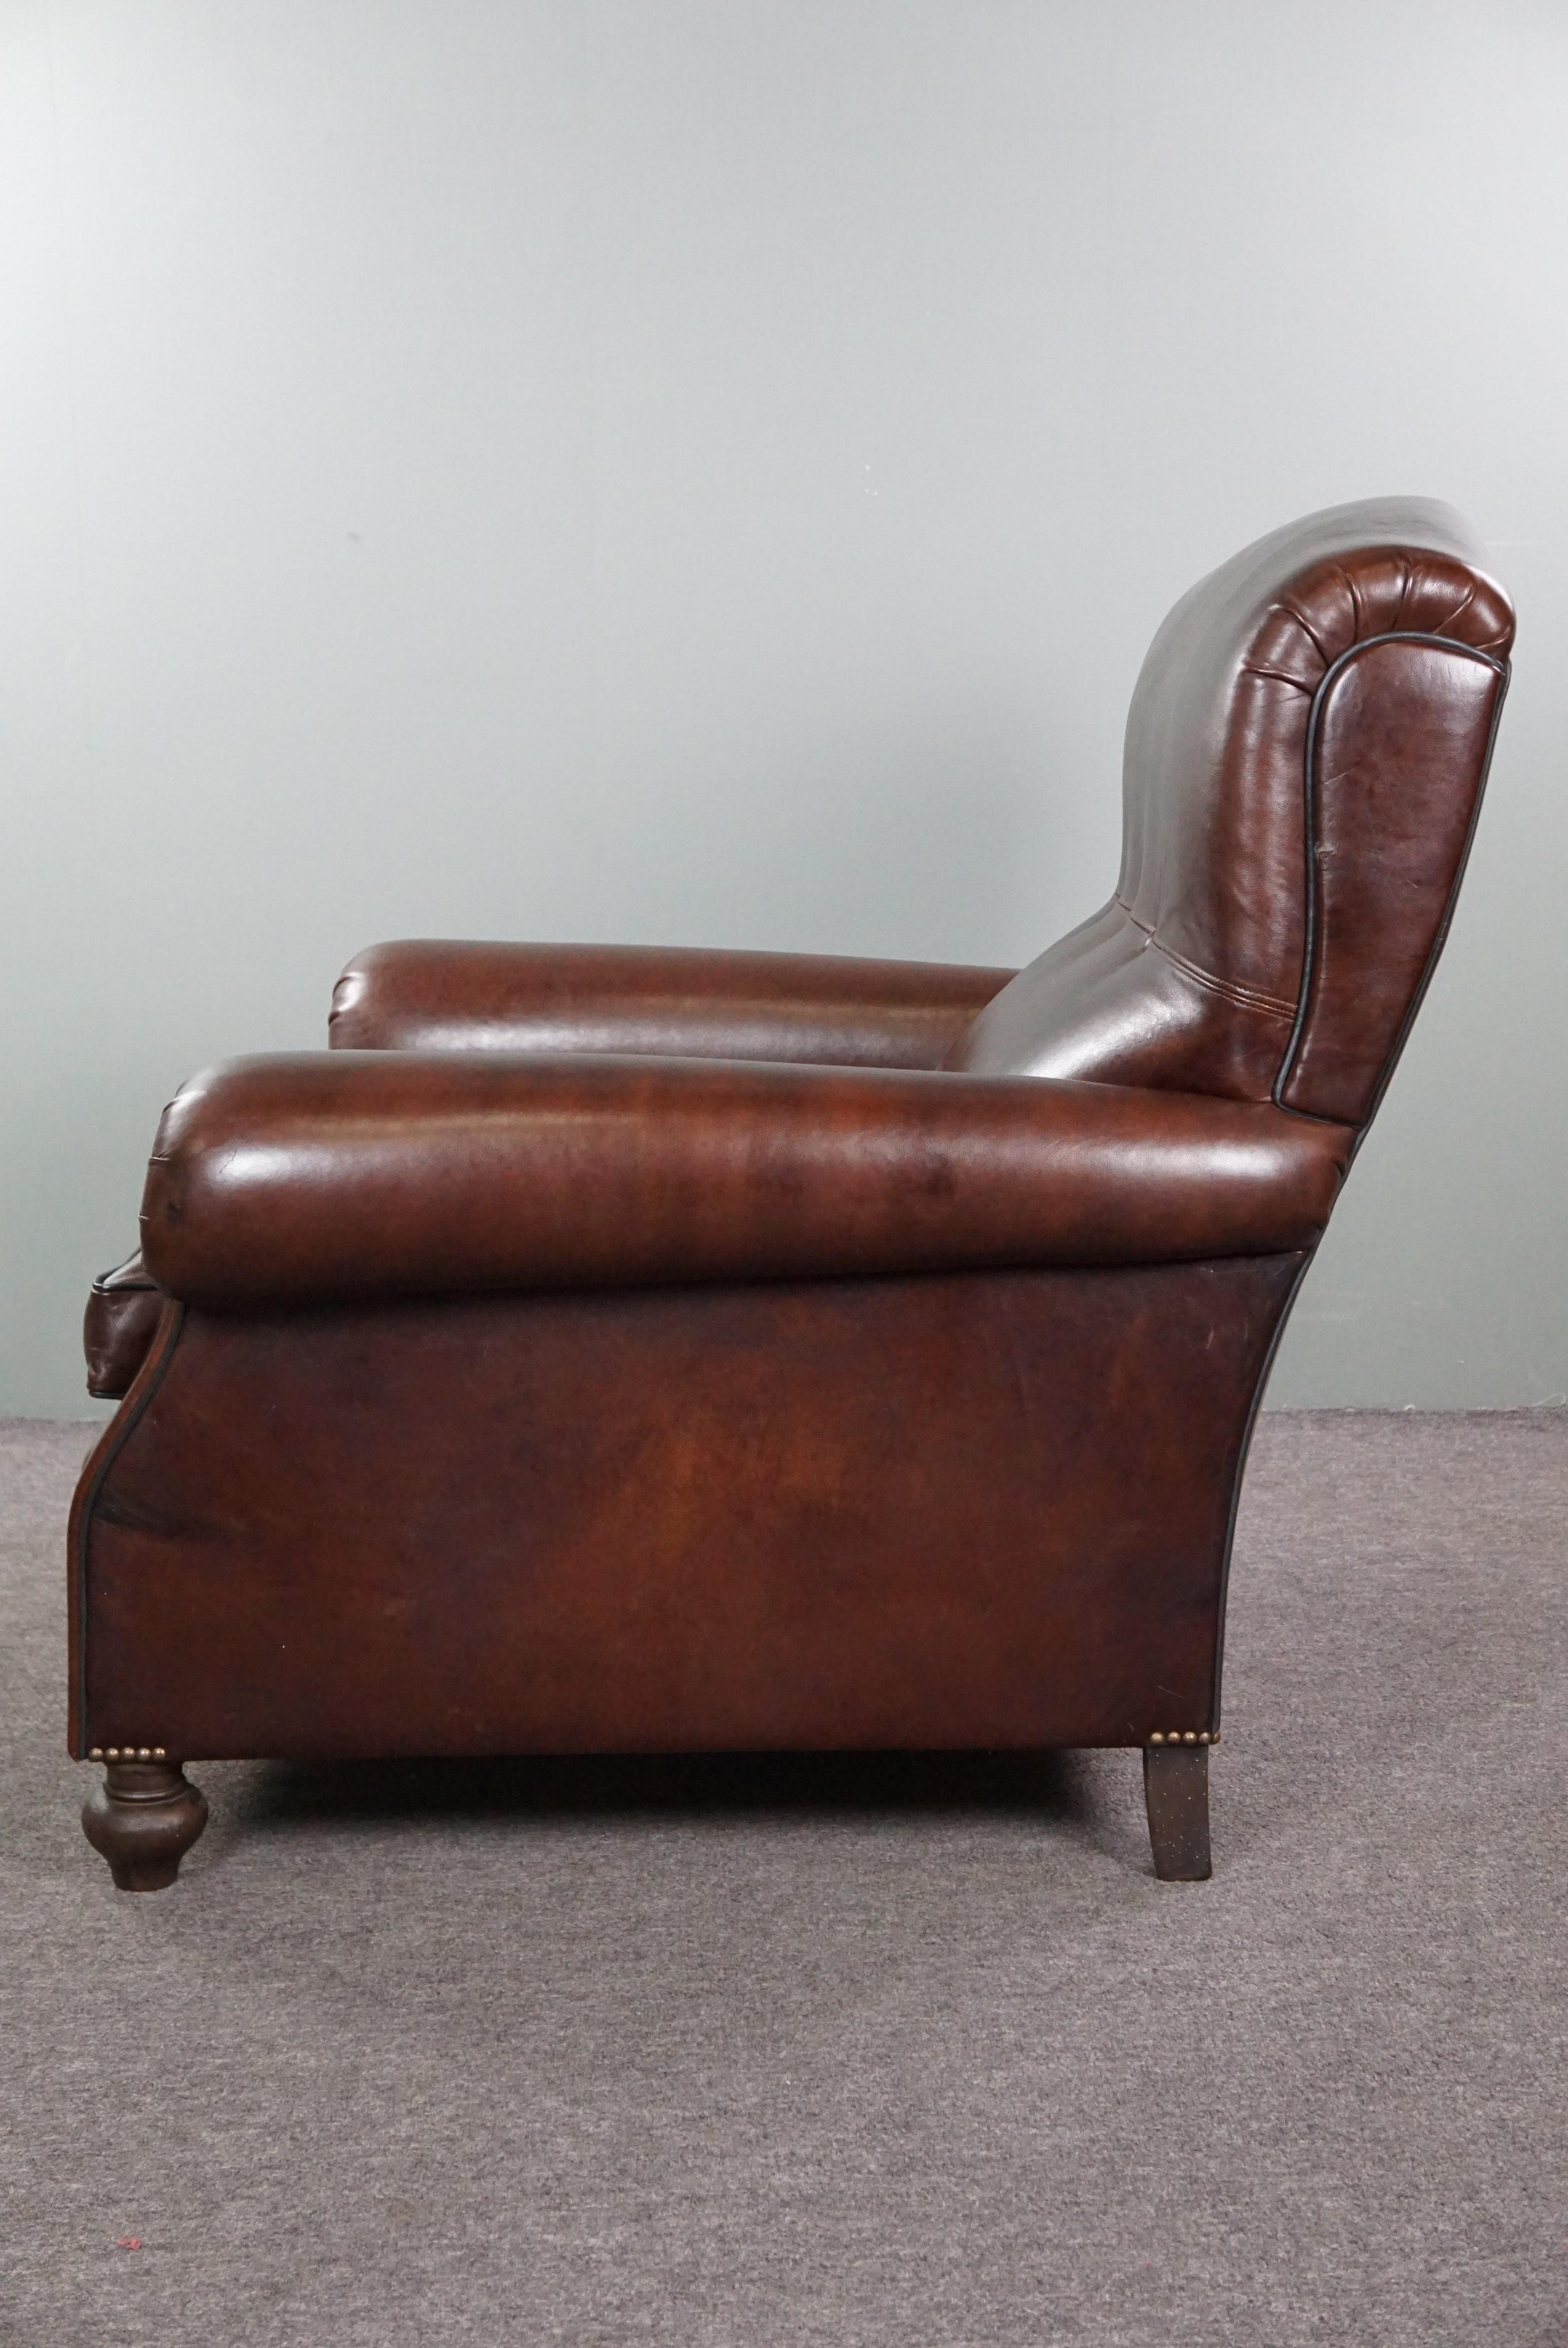 Leather Recently reupholstered old English armchair in dark sheep leather color For Sale